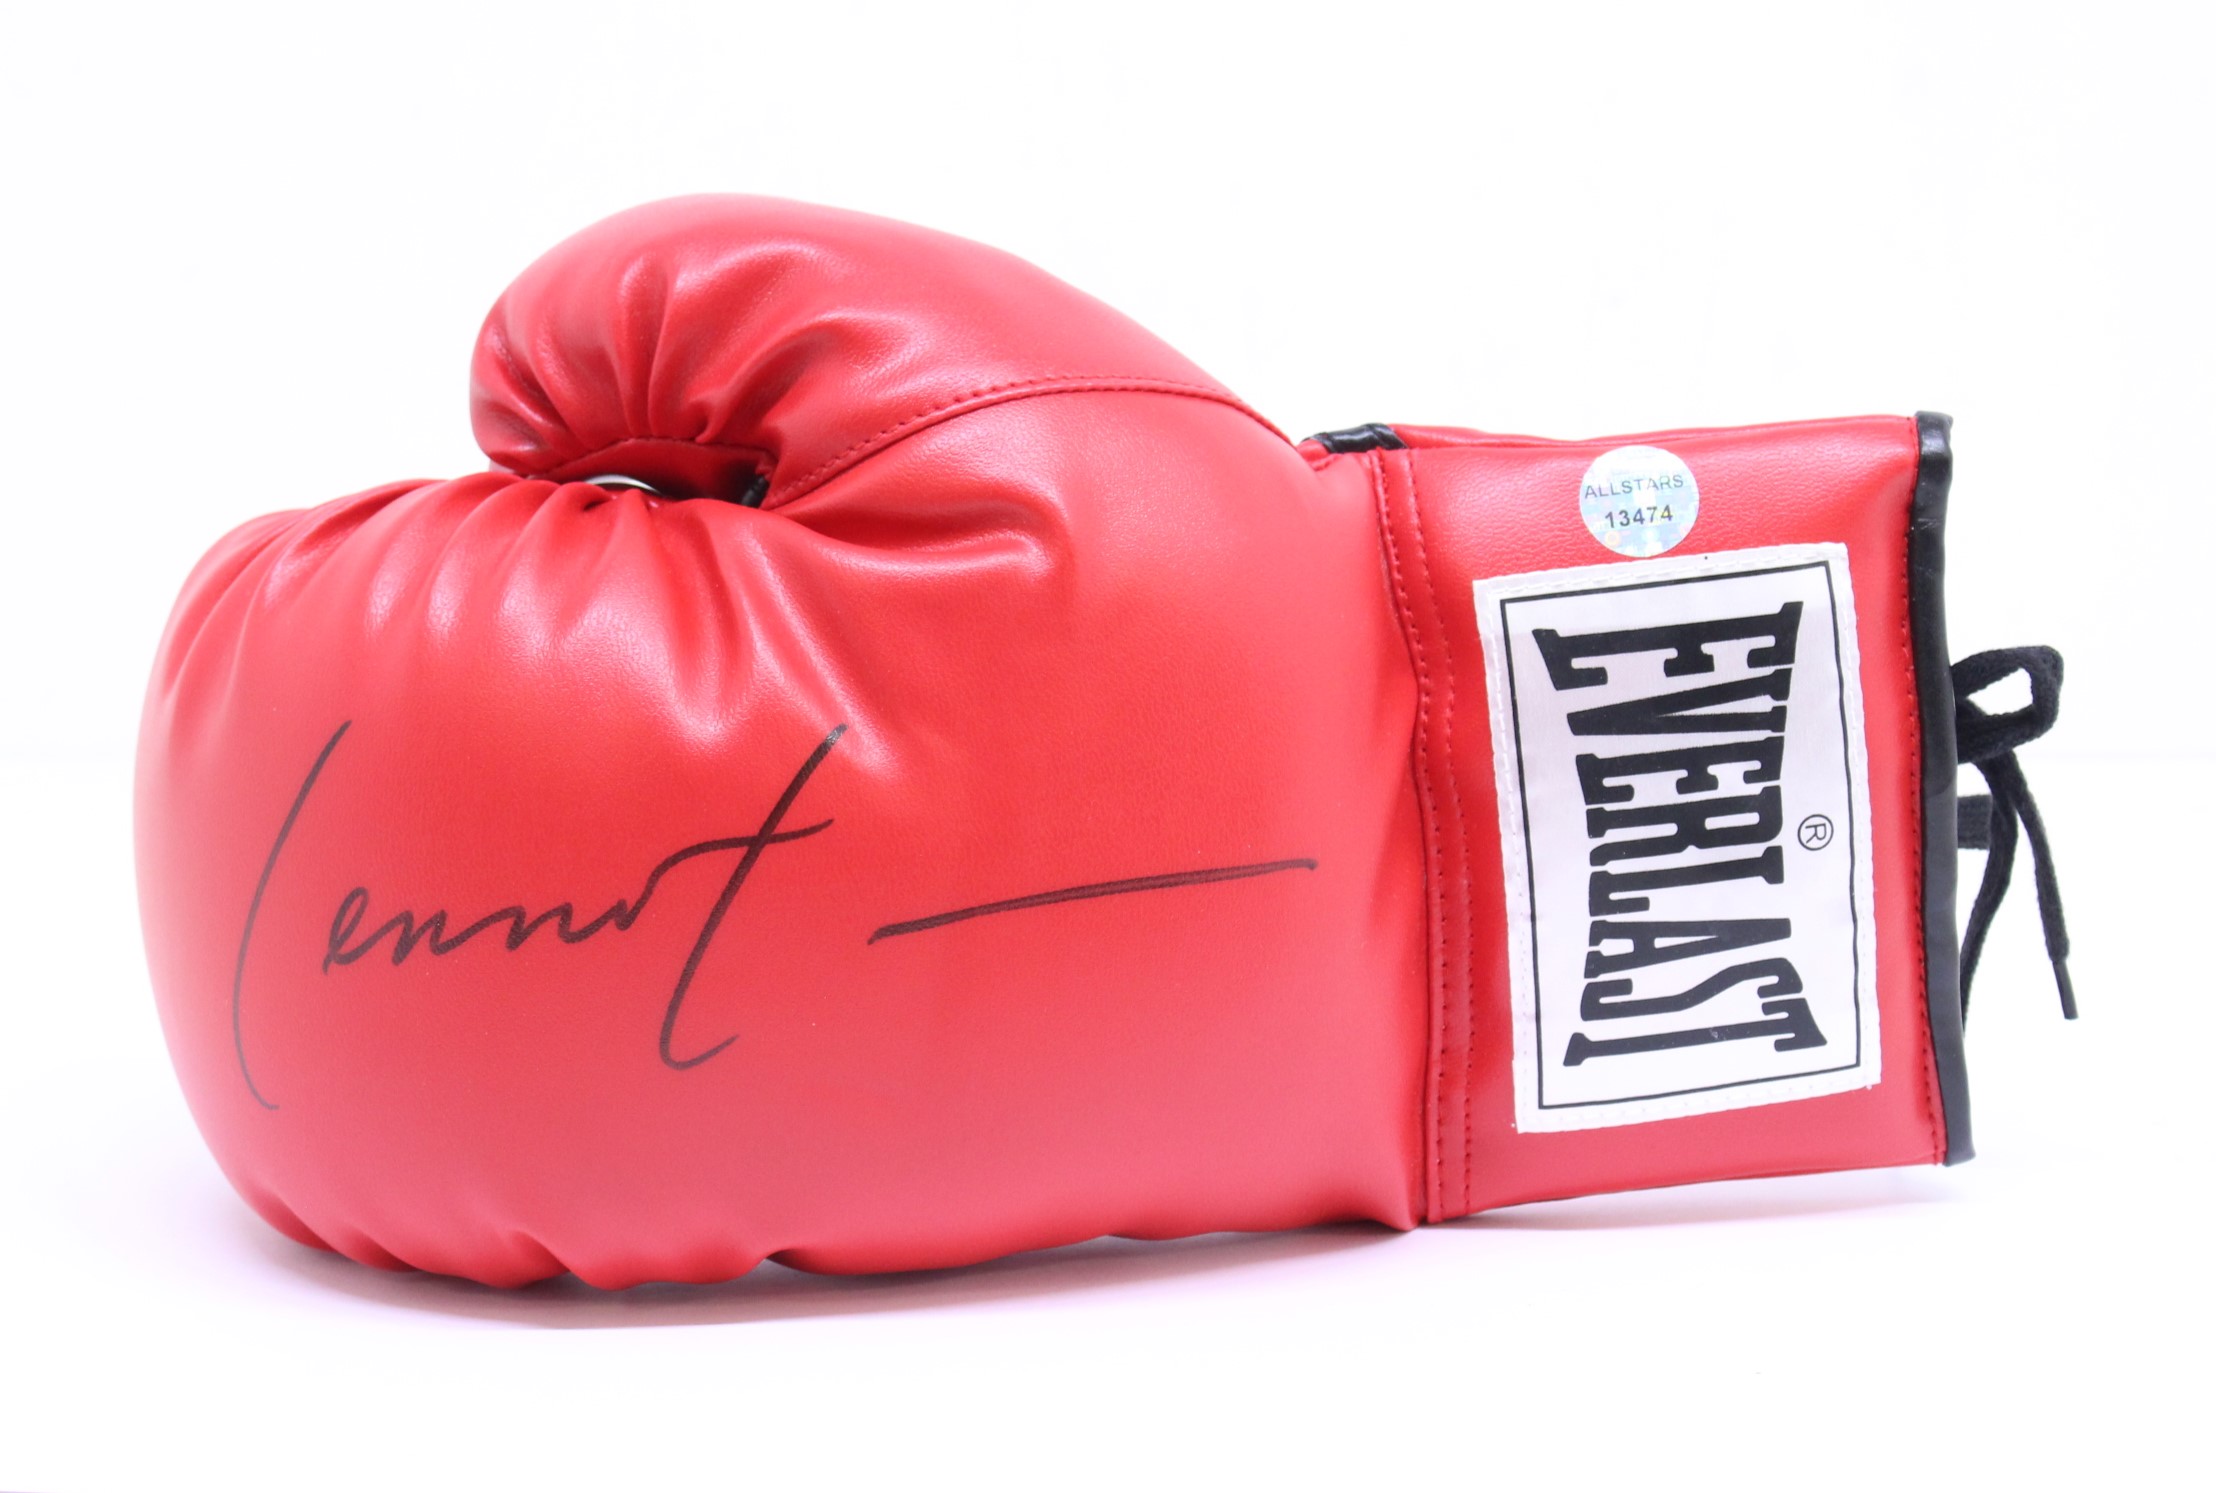 Boxing: A signed Everlast, Lennox Lewis Boxing Glove, authenticated by Allstars 13474. Signature